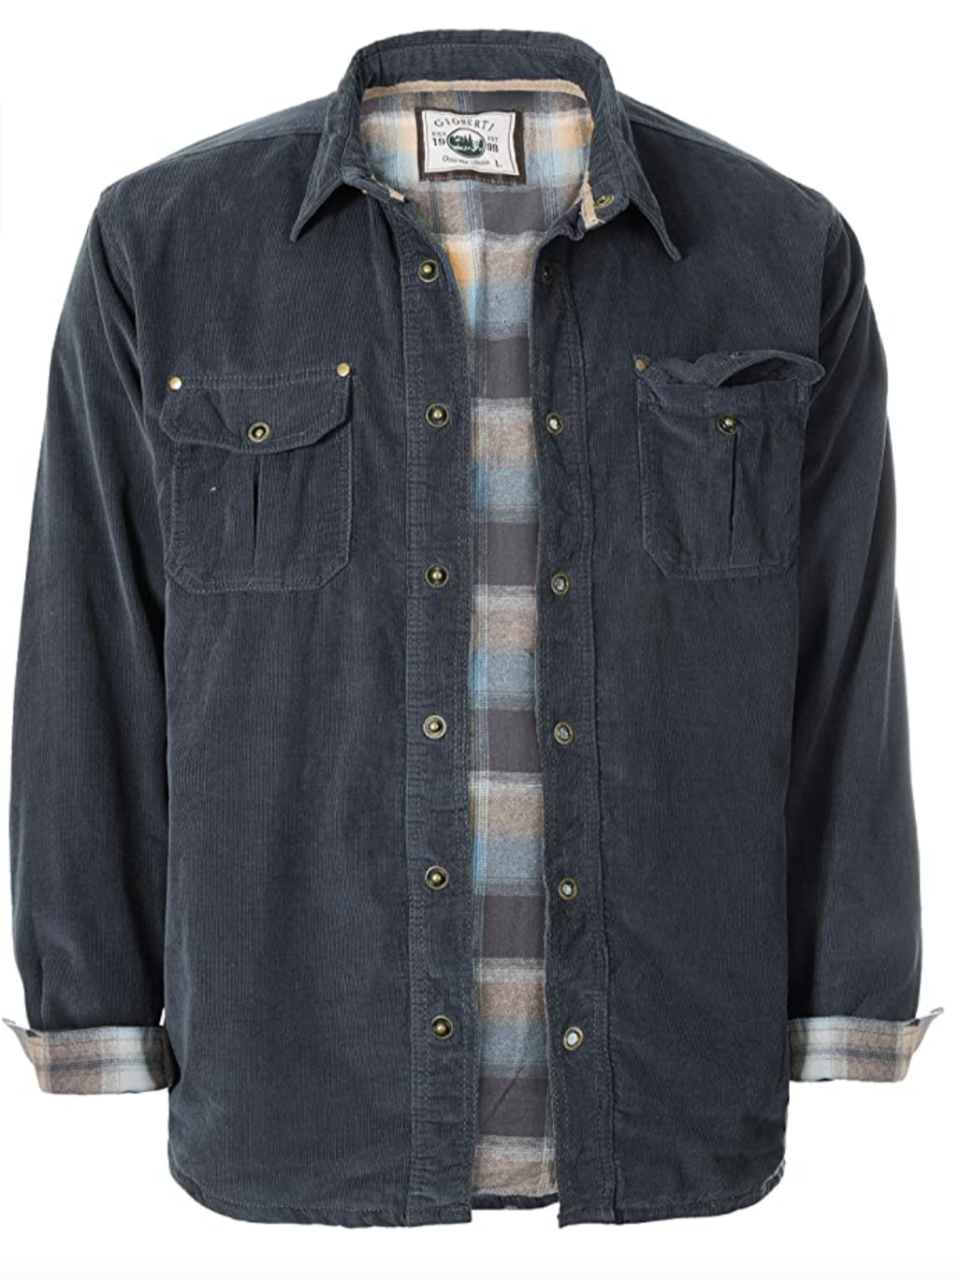 Charcoal corduroy jacket with flannel inner